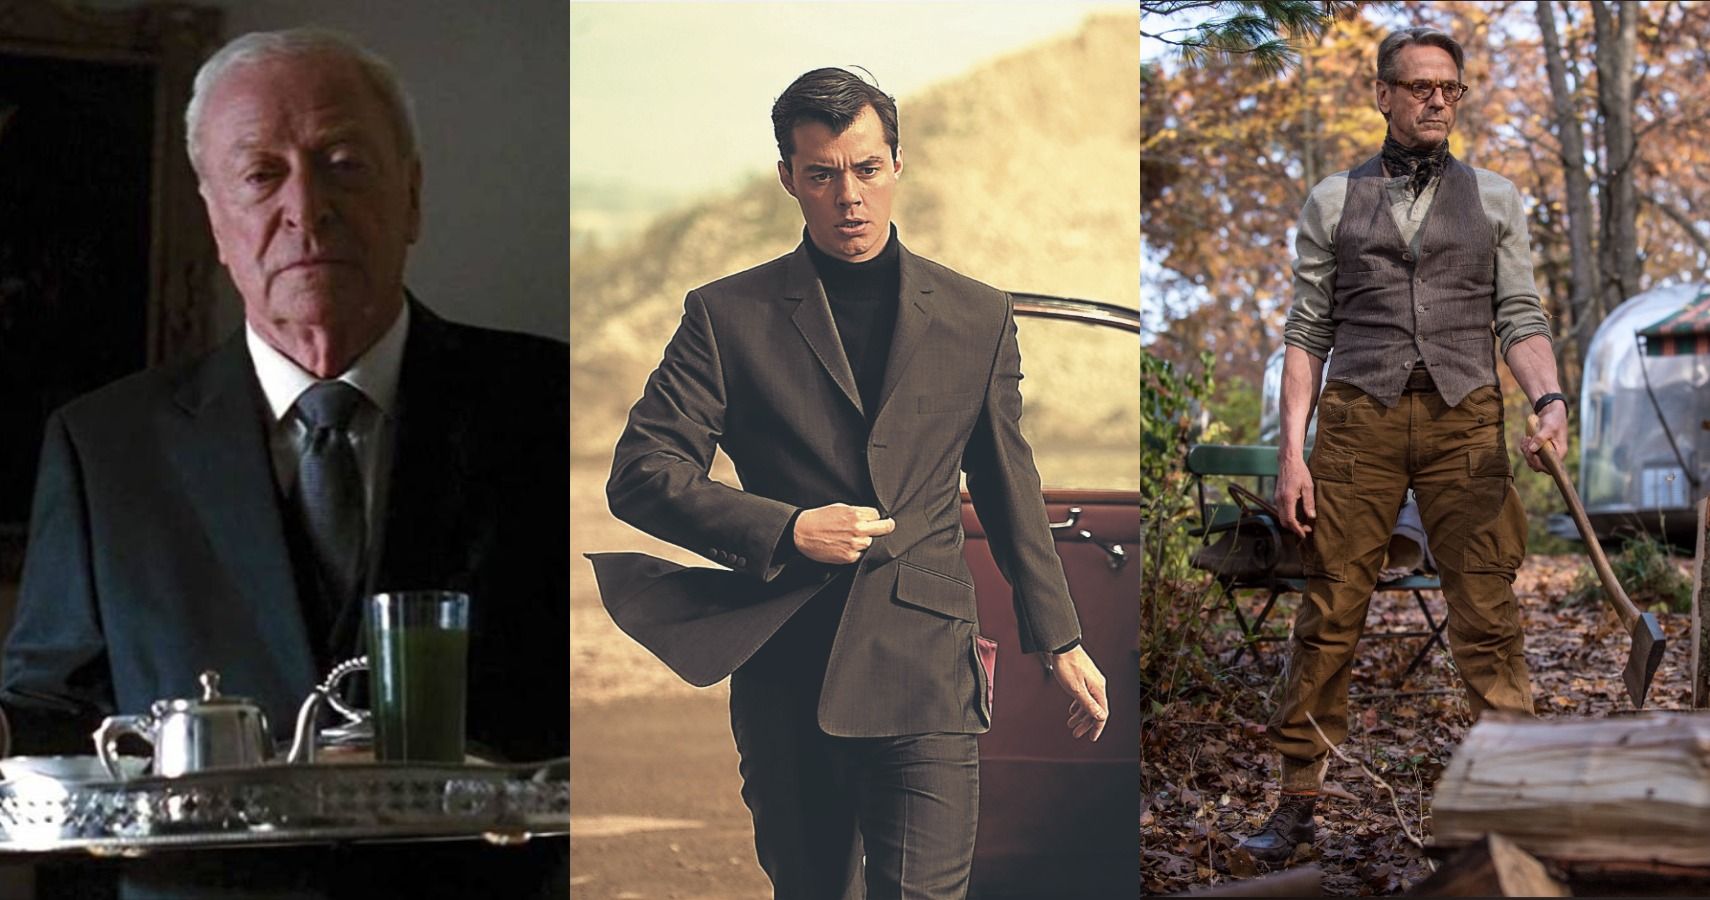 Pennyworth 5 Times Jack Bannon Proved To Be The Best Alfred (& 5 Better Alternatives)